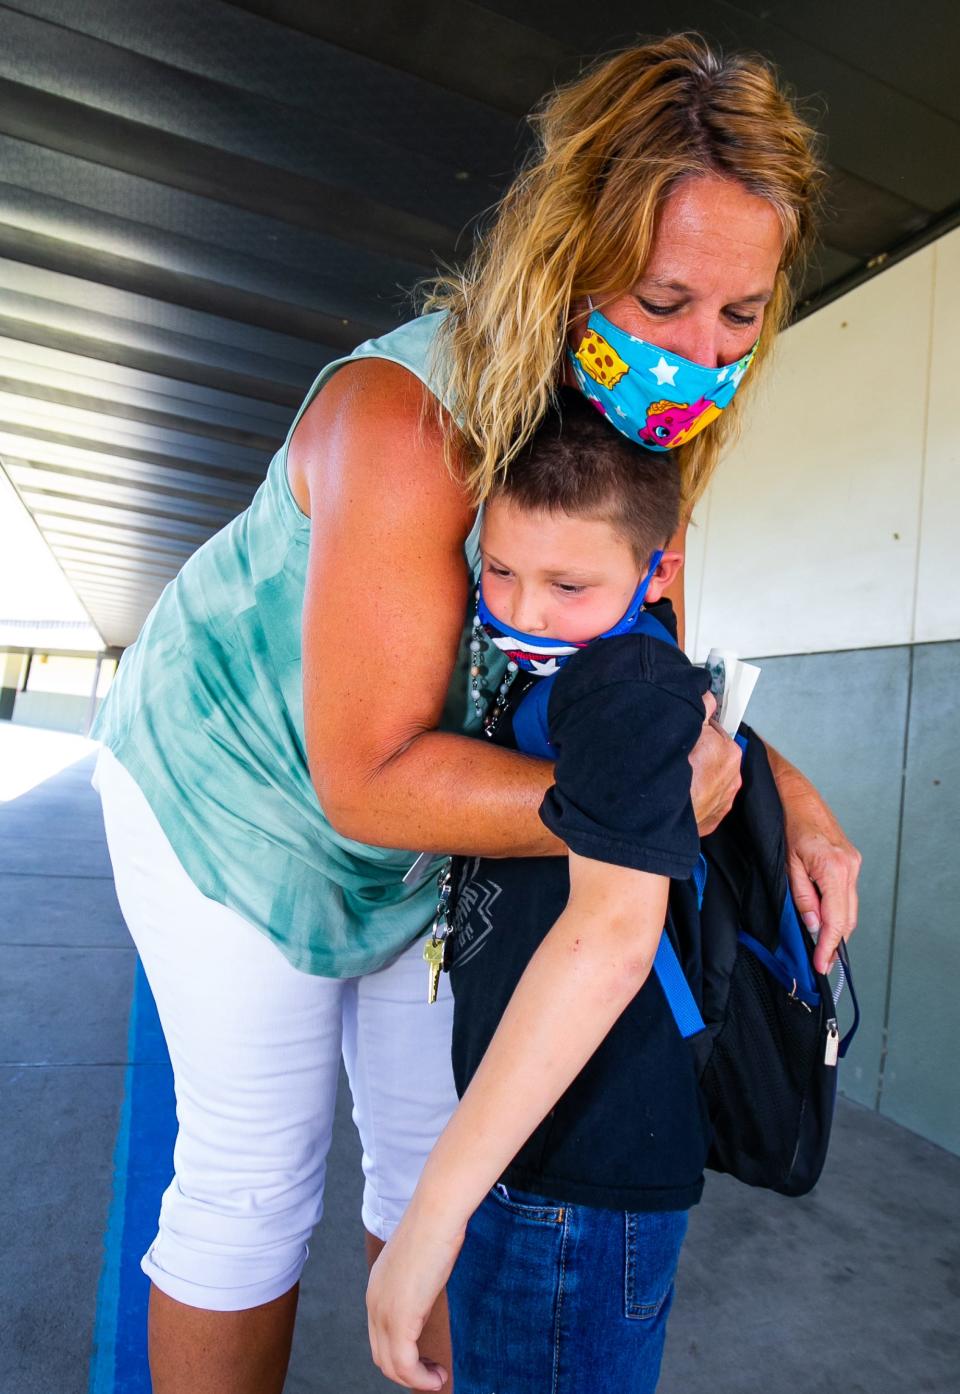 Belleview-Santos Elementary School counselor Cindy Hayes gives second grader Landon Hicks, 8, a hug on the last day of school in May 2021.